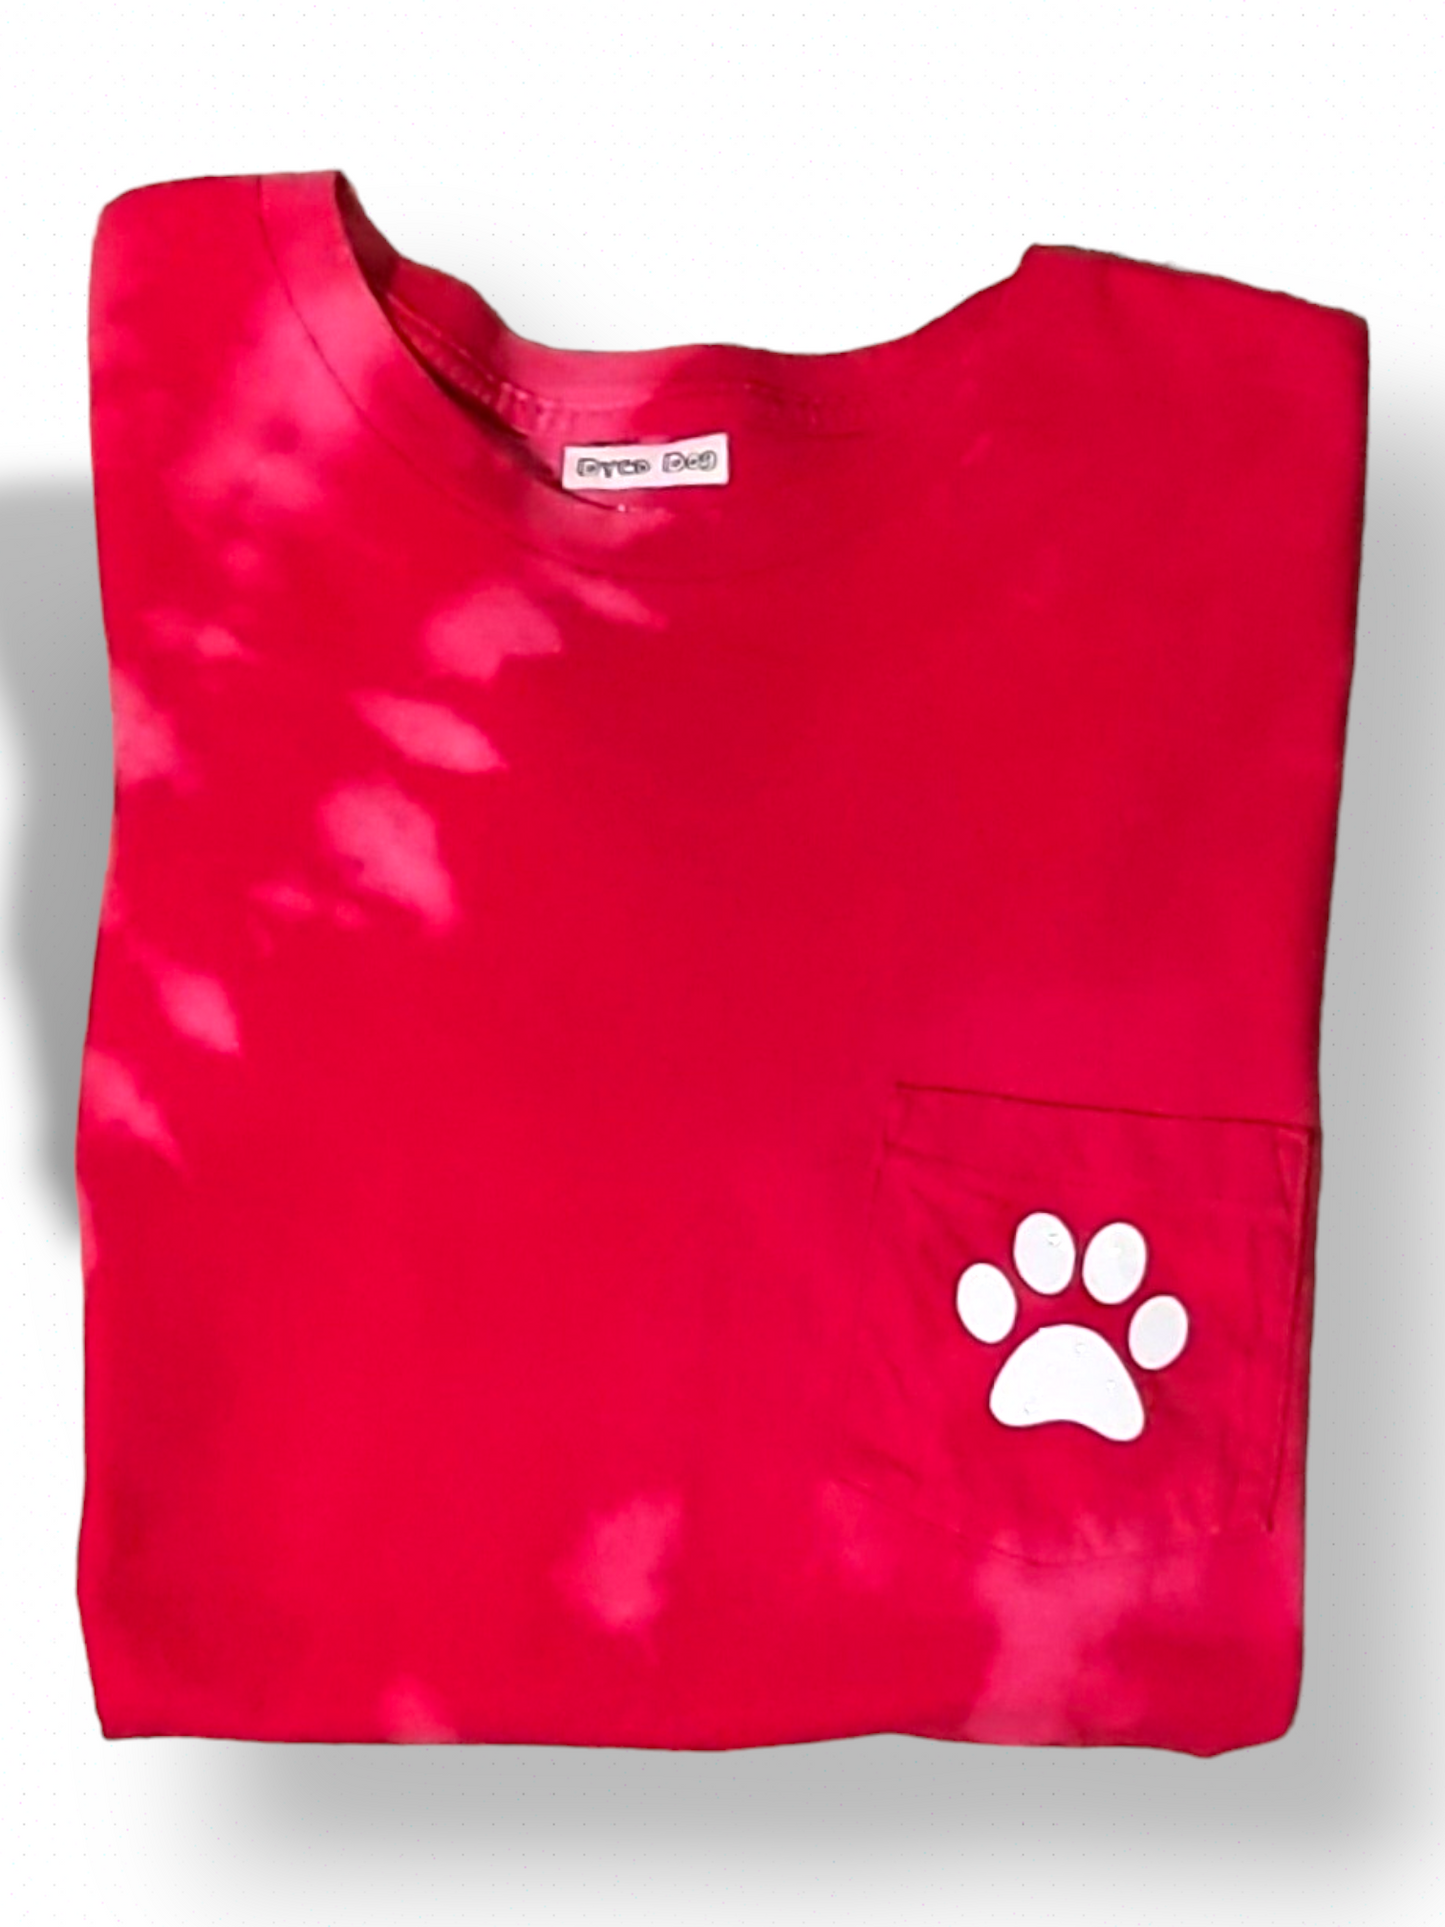 Red Tie-Dyed Medium Pocket Tee with Paw